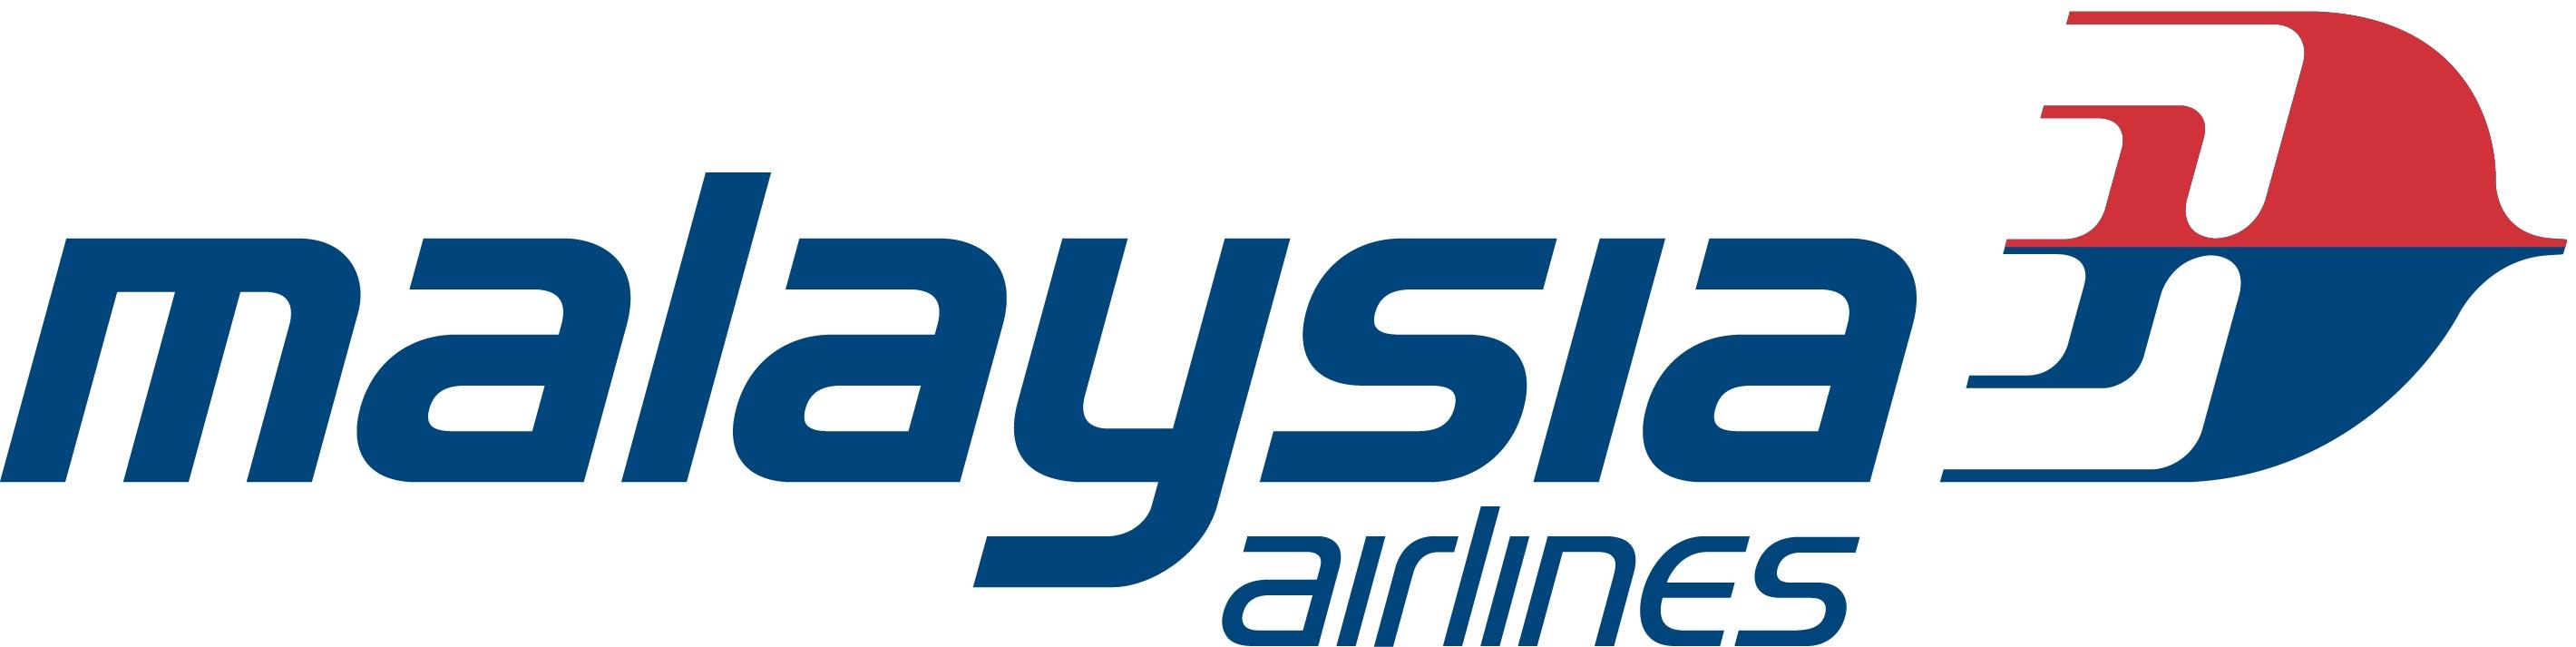 Airlines Logo - Malaysia Airlines Logo - Live and Let's Fly